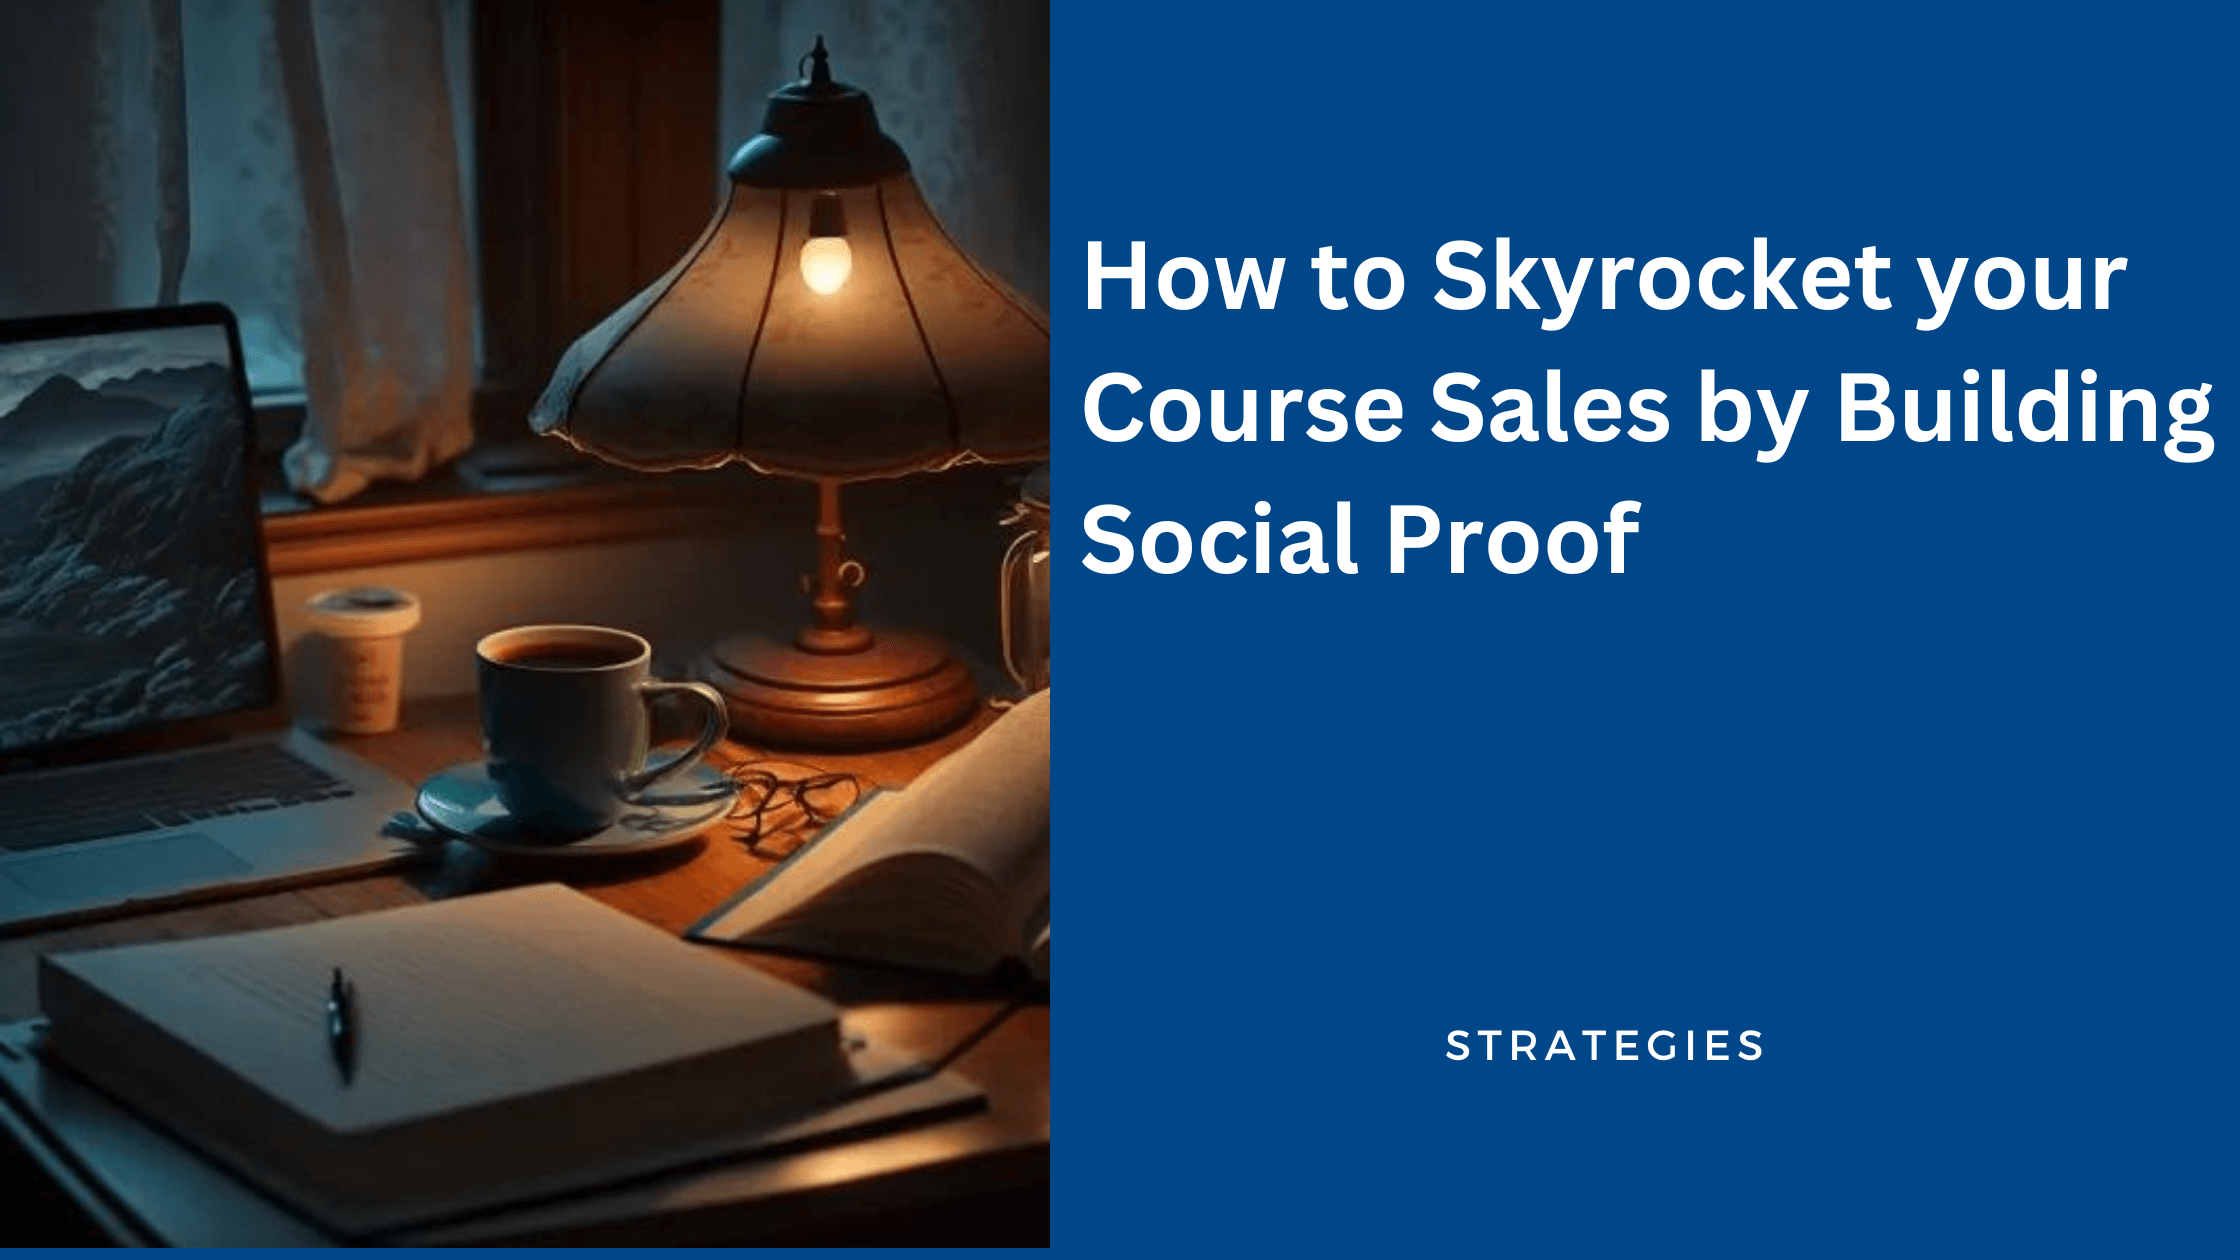 Skyrocket your course sales by building social proof